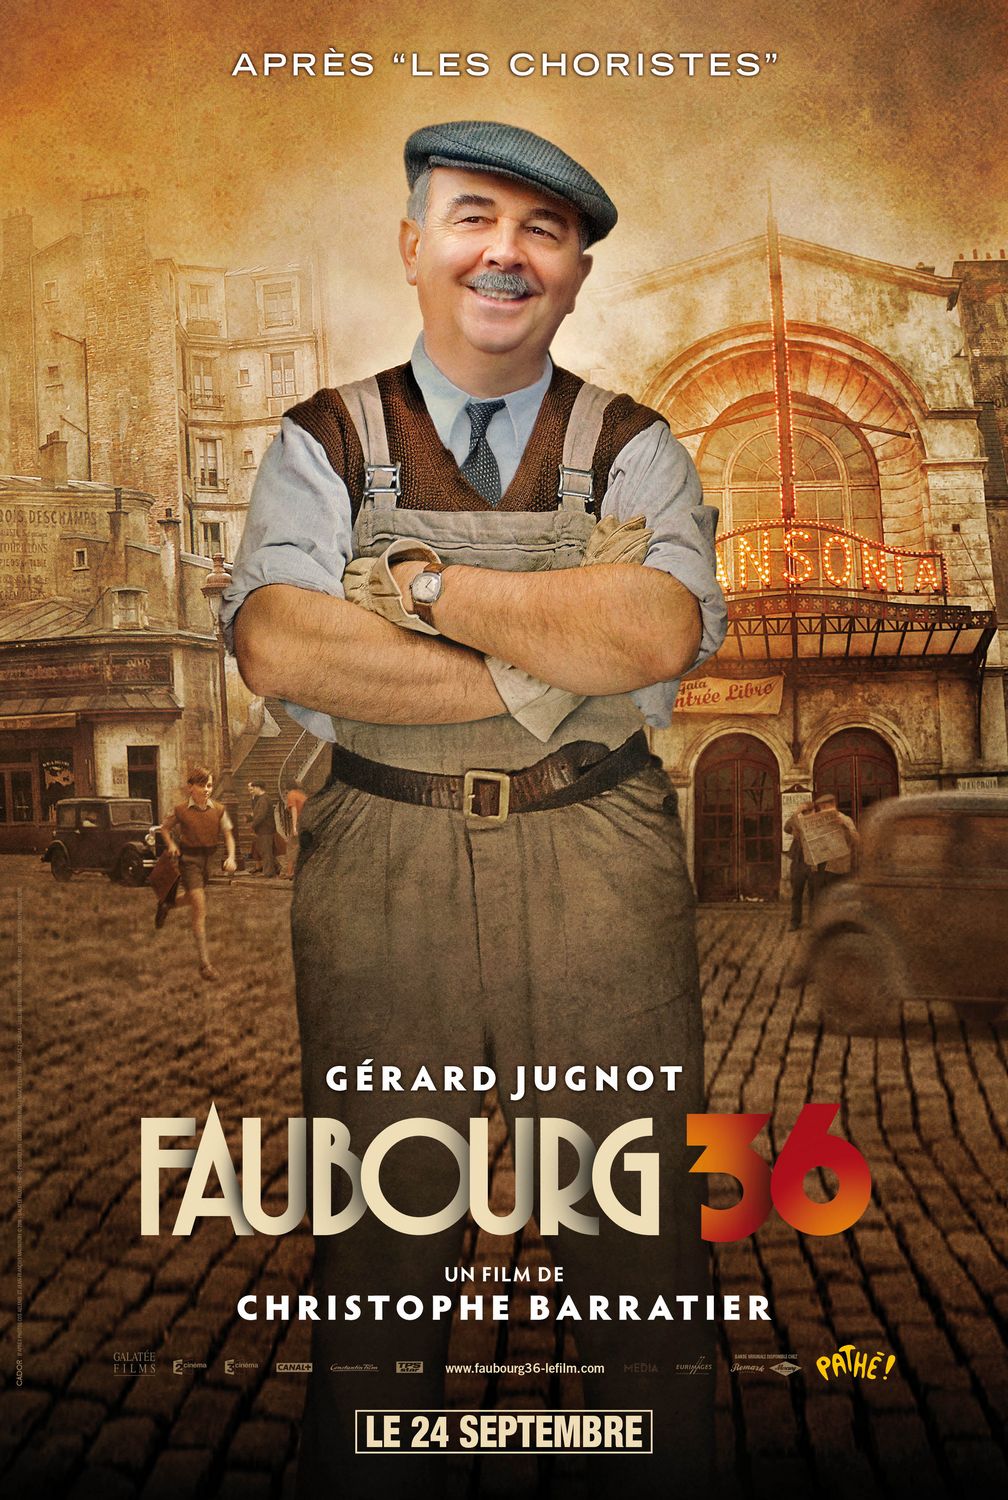 Extra Large Movie Poster Image for Faubourg 36 (#2 of 6)